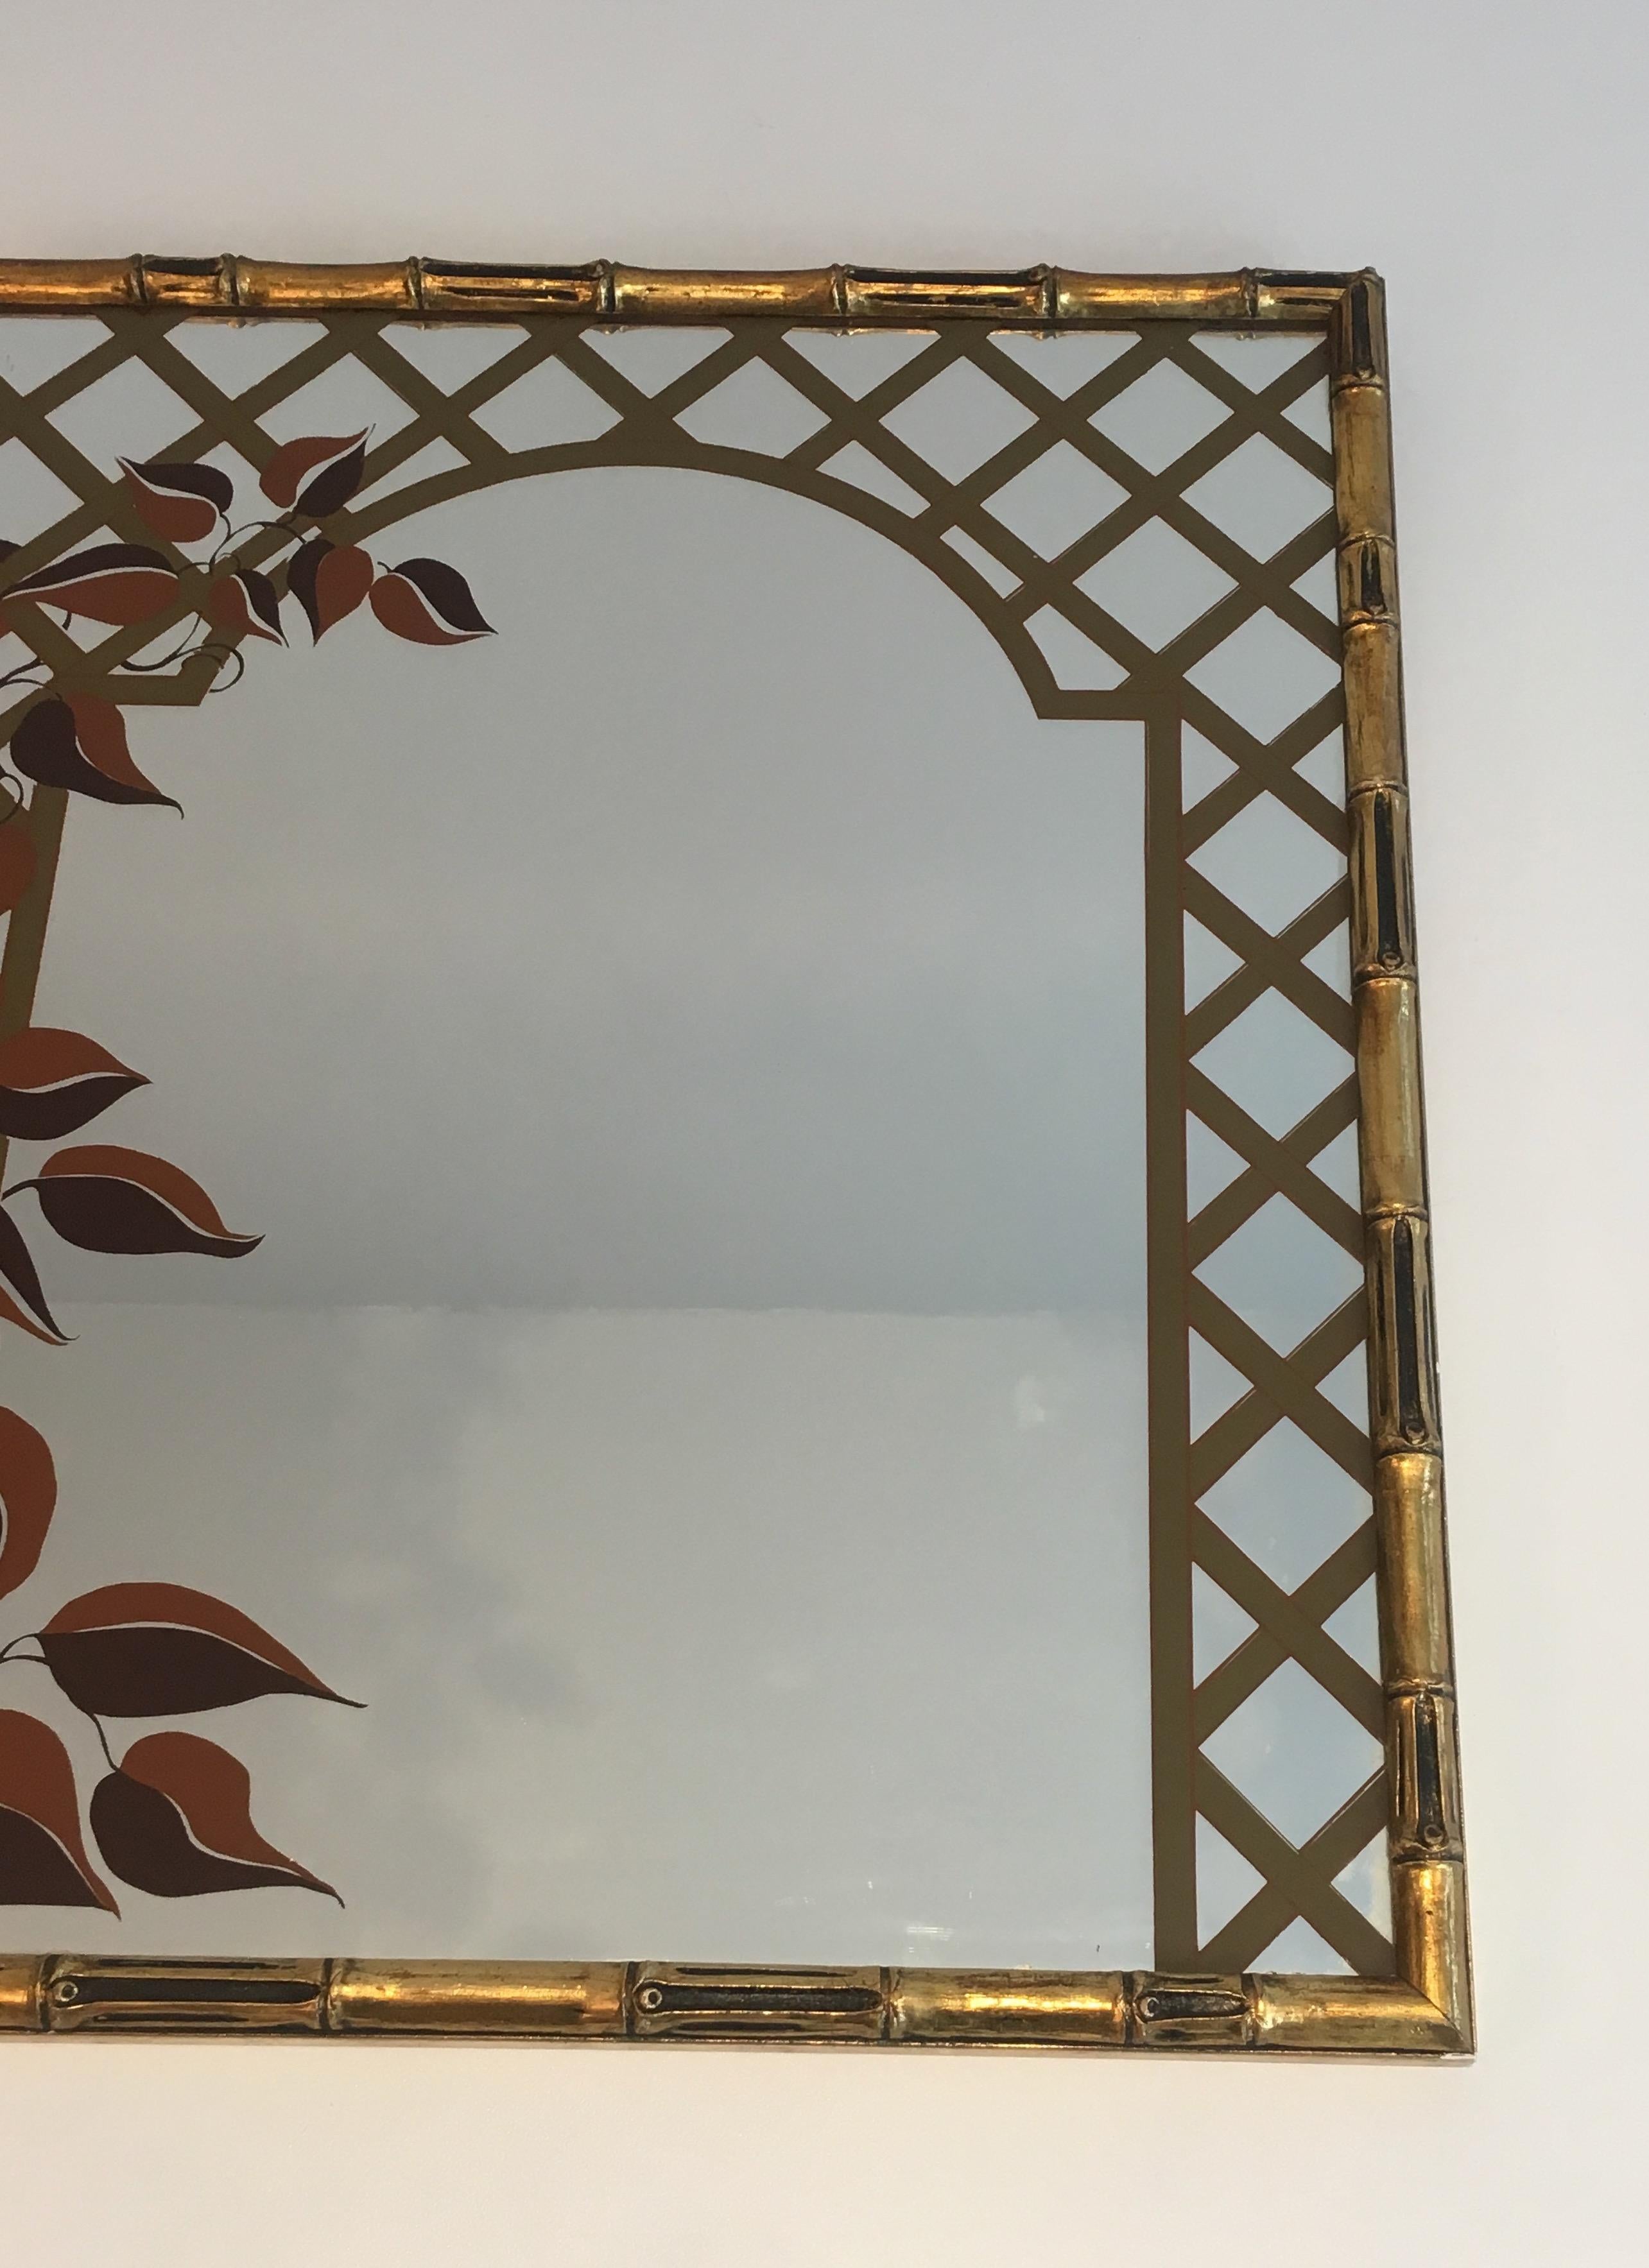 Decorative Faux-Bamboo Gilt Wood Mirror with Printed Floral Decor, Circa 1970 For Sale 7